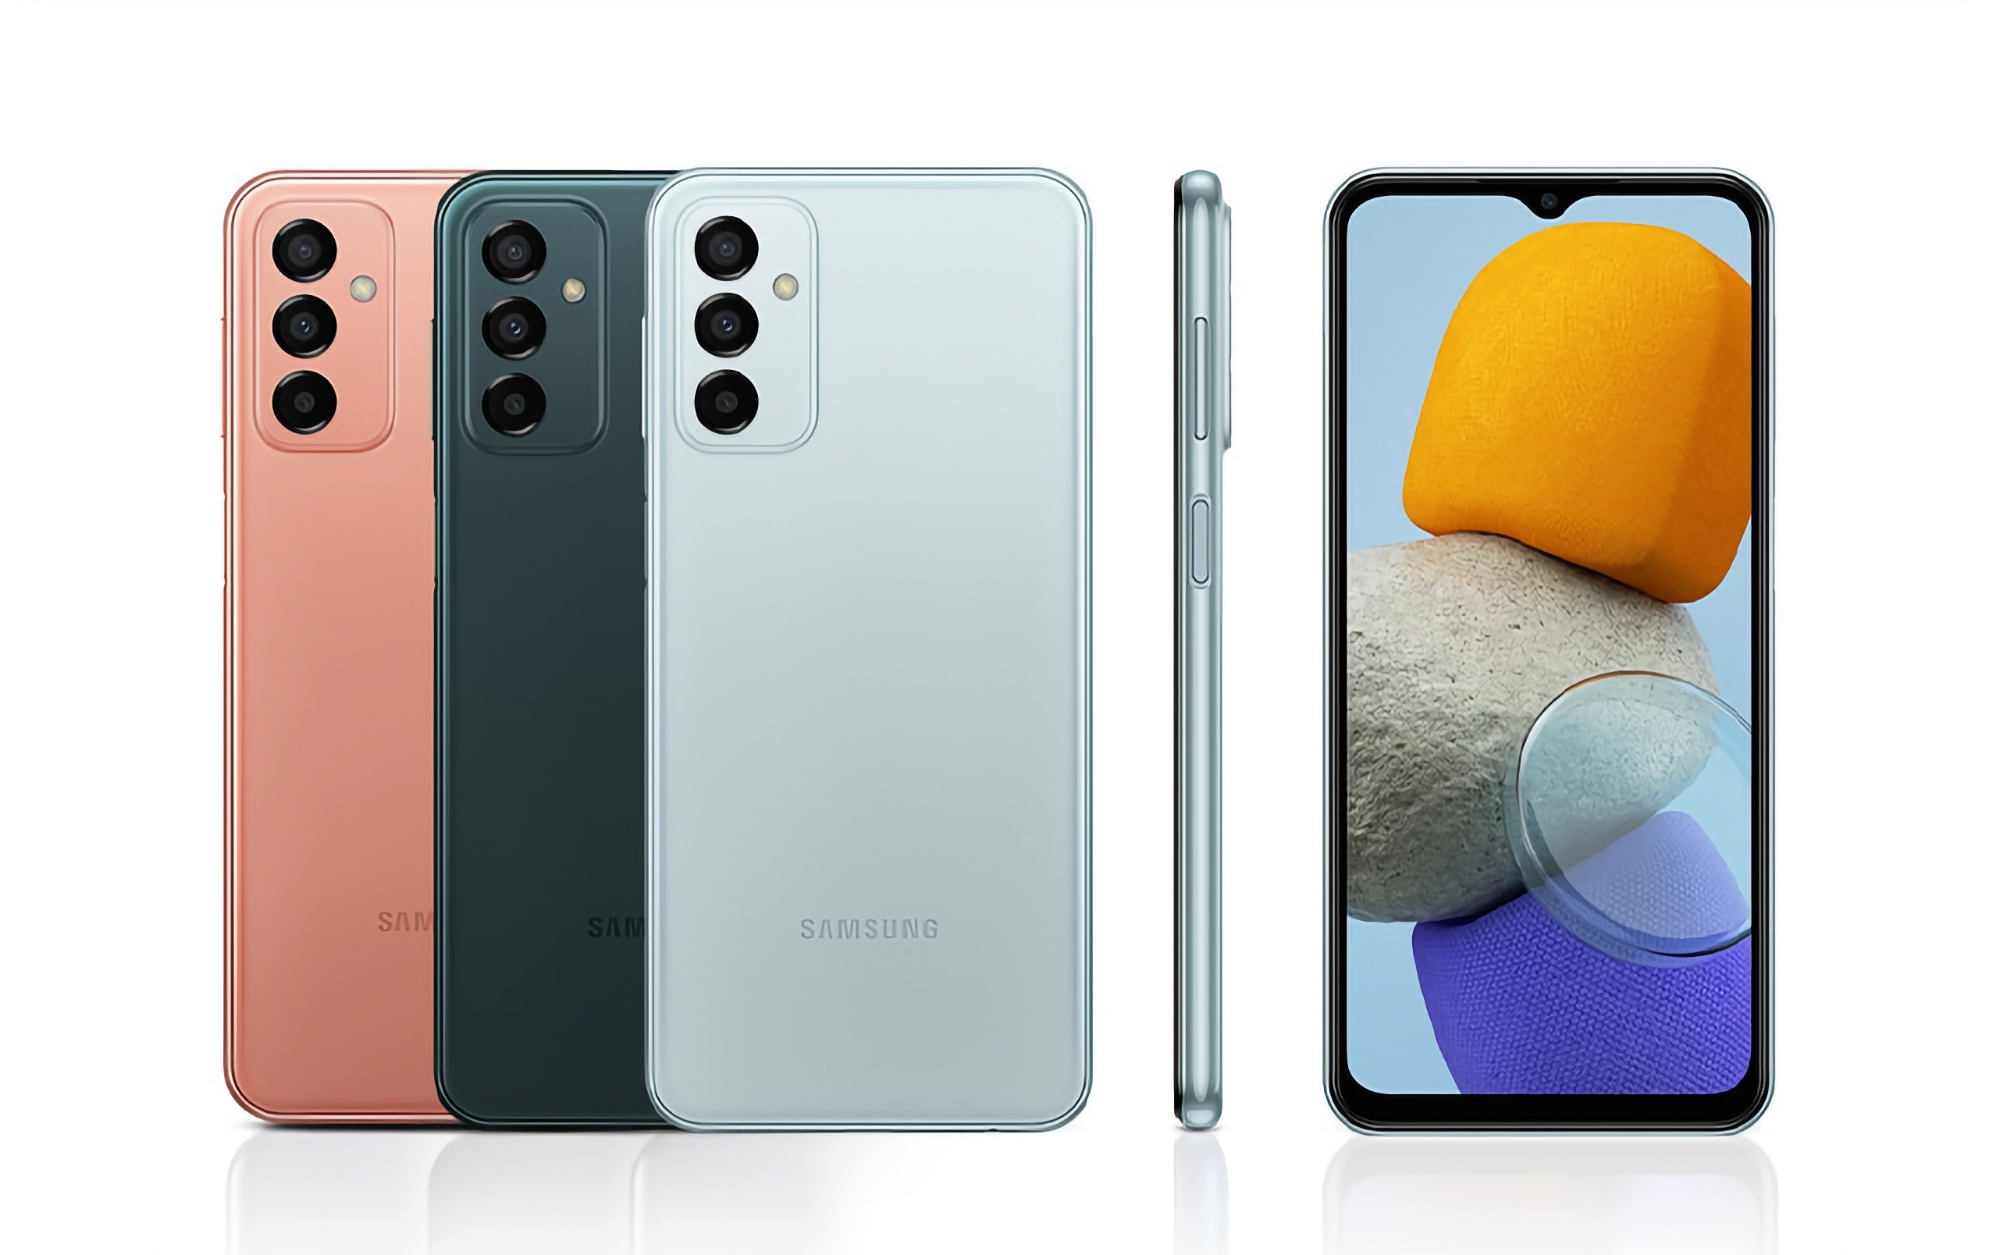 Samsung Galaxy M23 5G budget smartphone started getting Android 13 with One UI 5.0